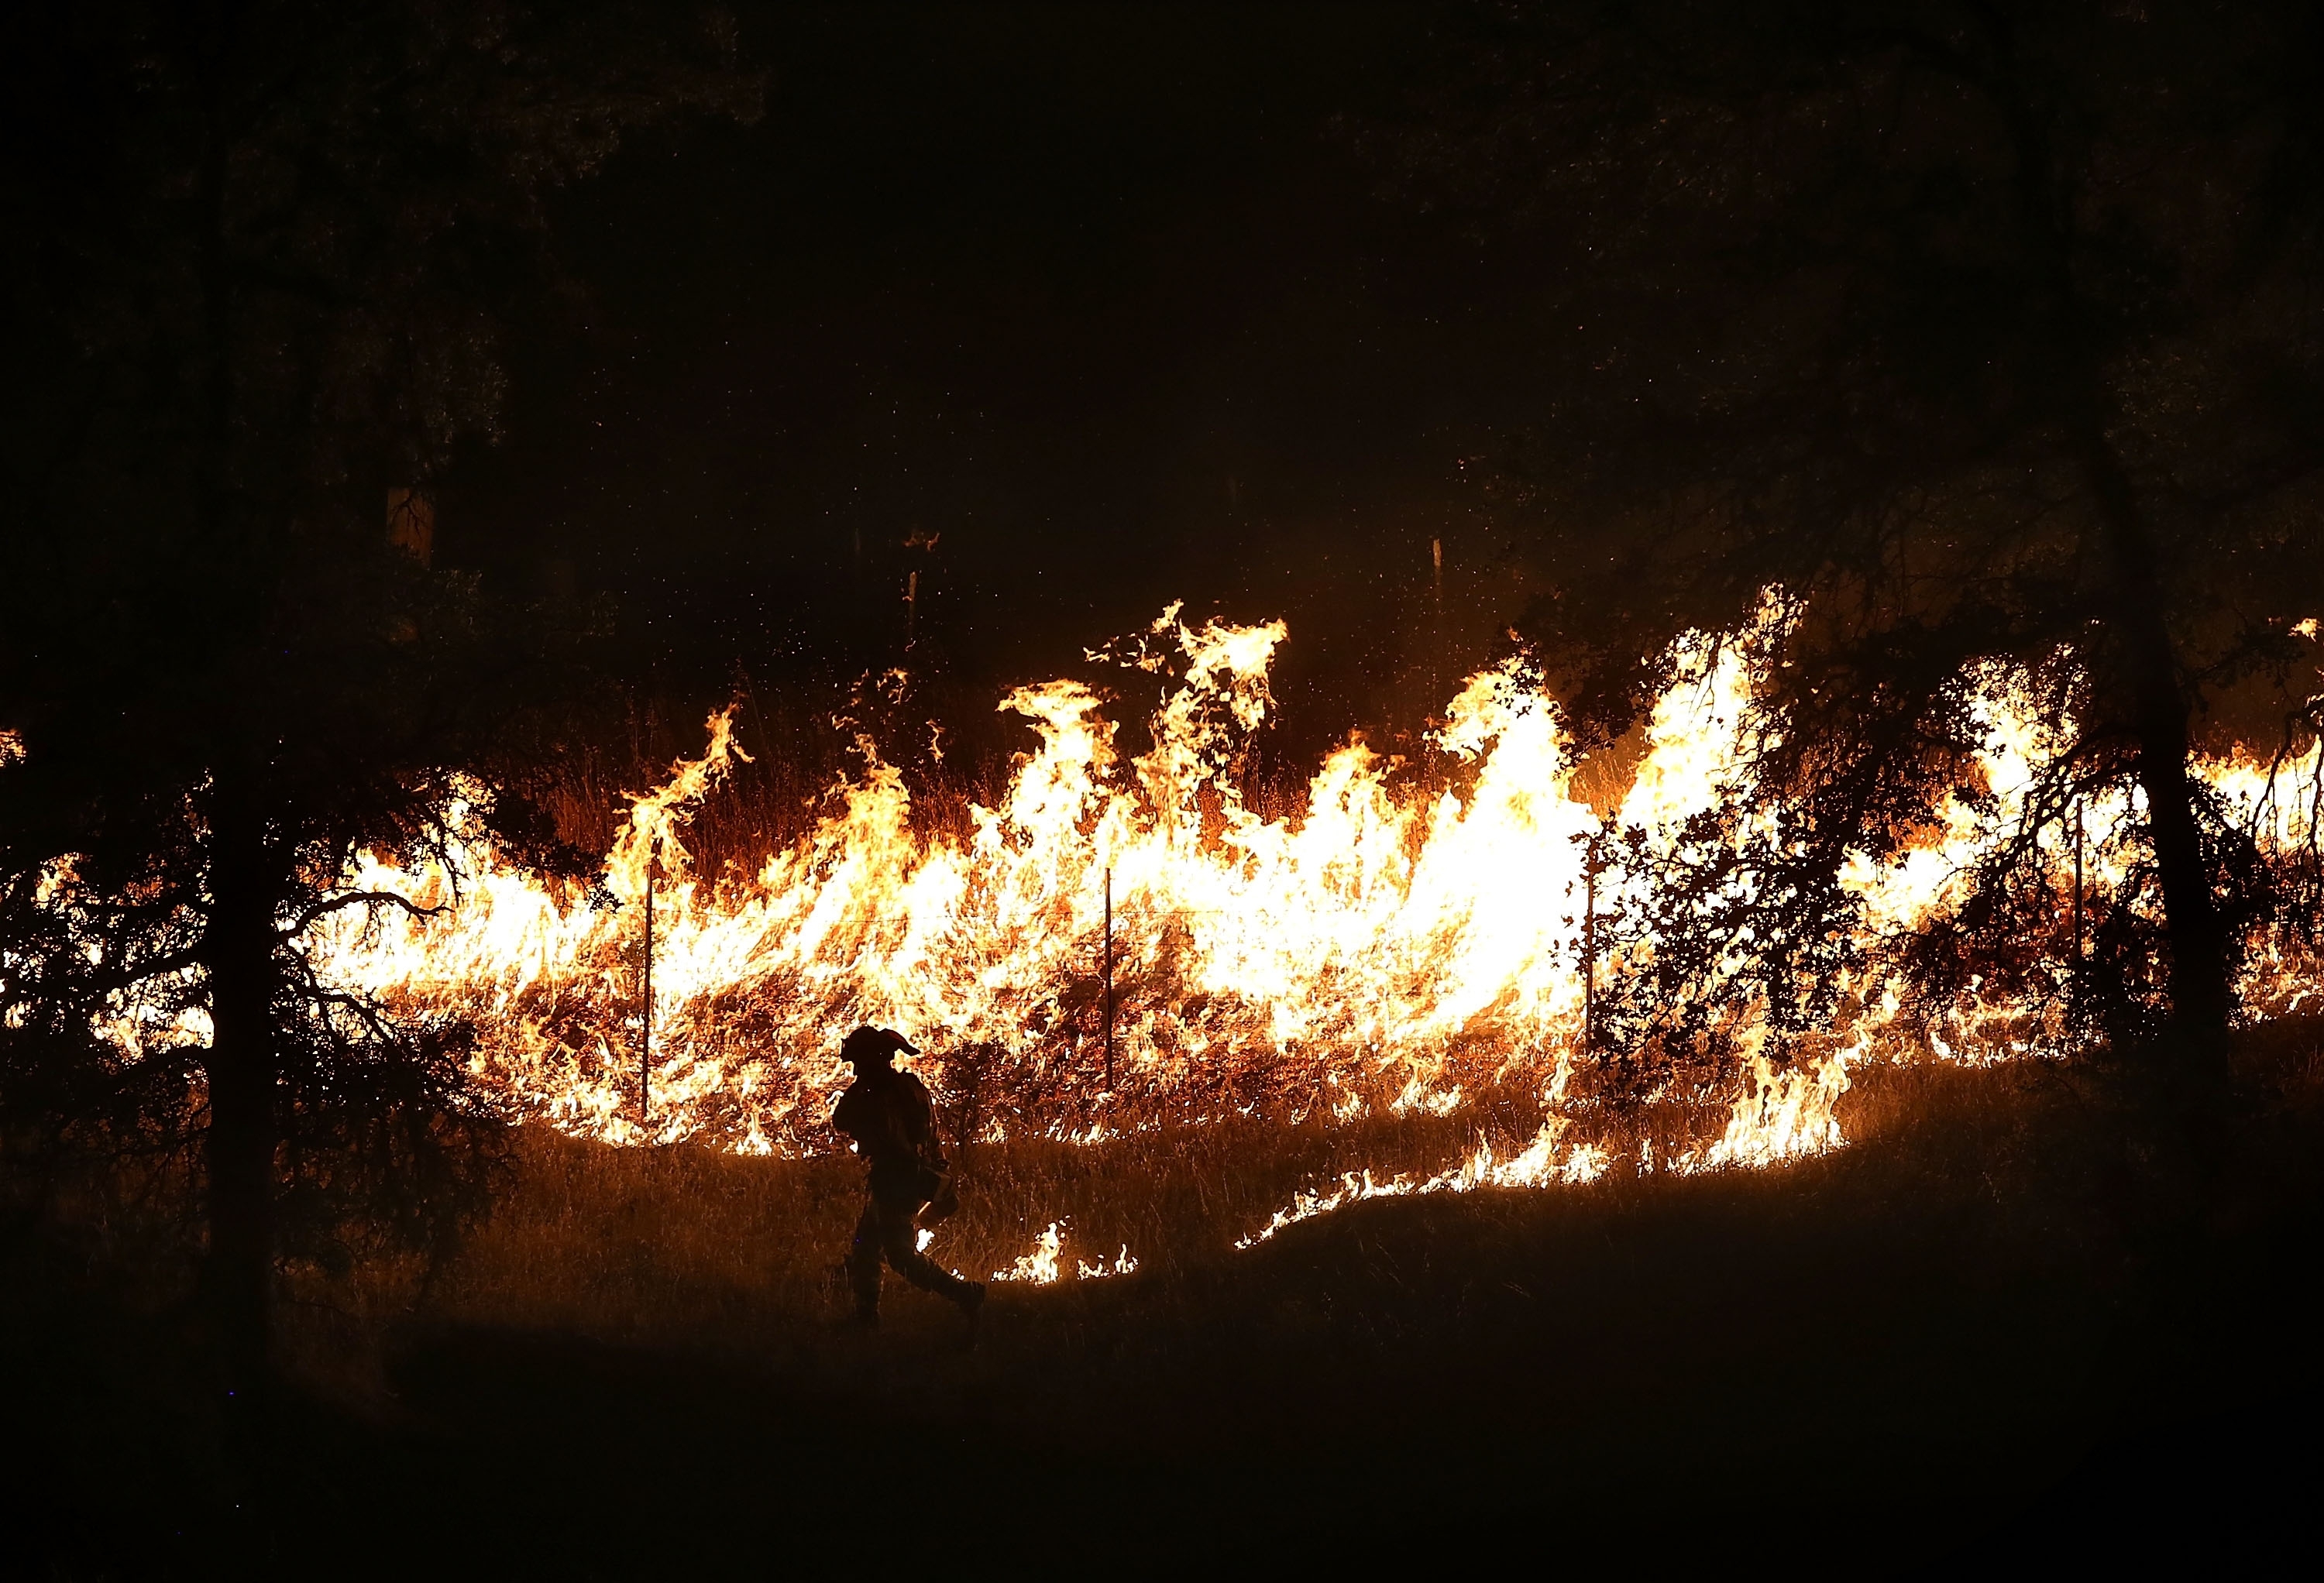 Bo uses a drip torch to start a backfire. This is a North American technique used in infernos of this scale.  Fire is started deliberately to stop the progress of an approaching fire by creating a burned area in its path.